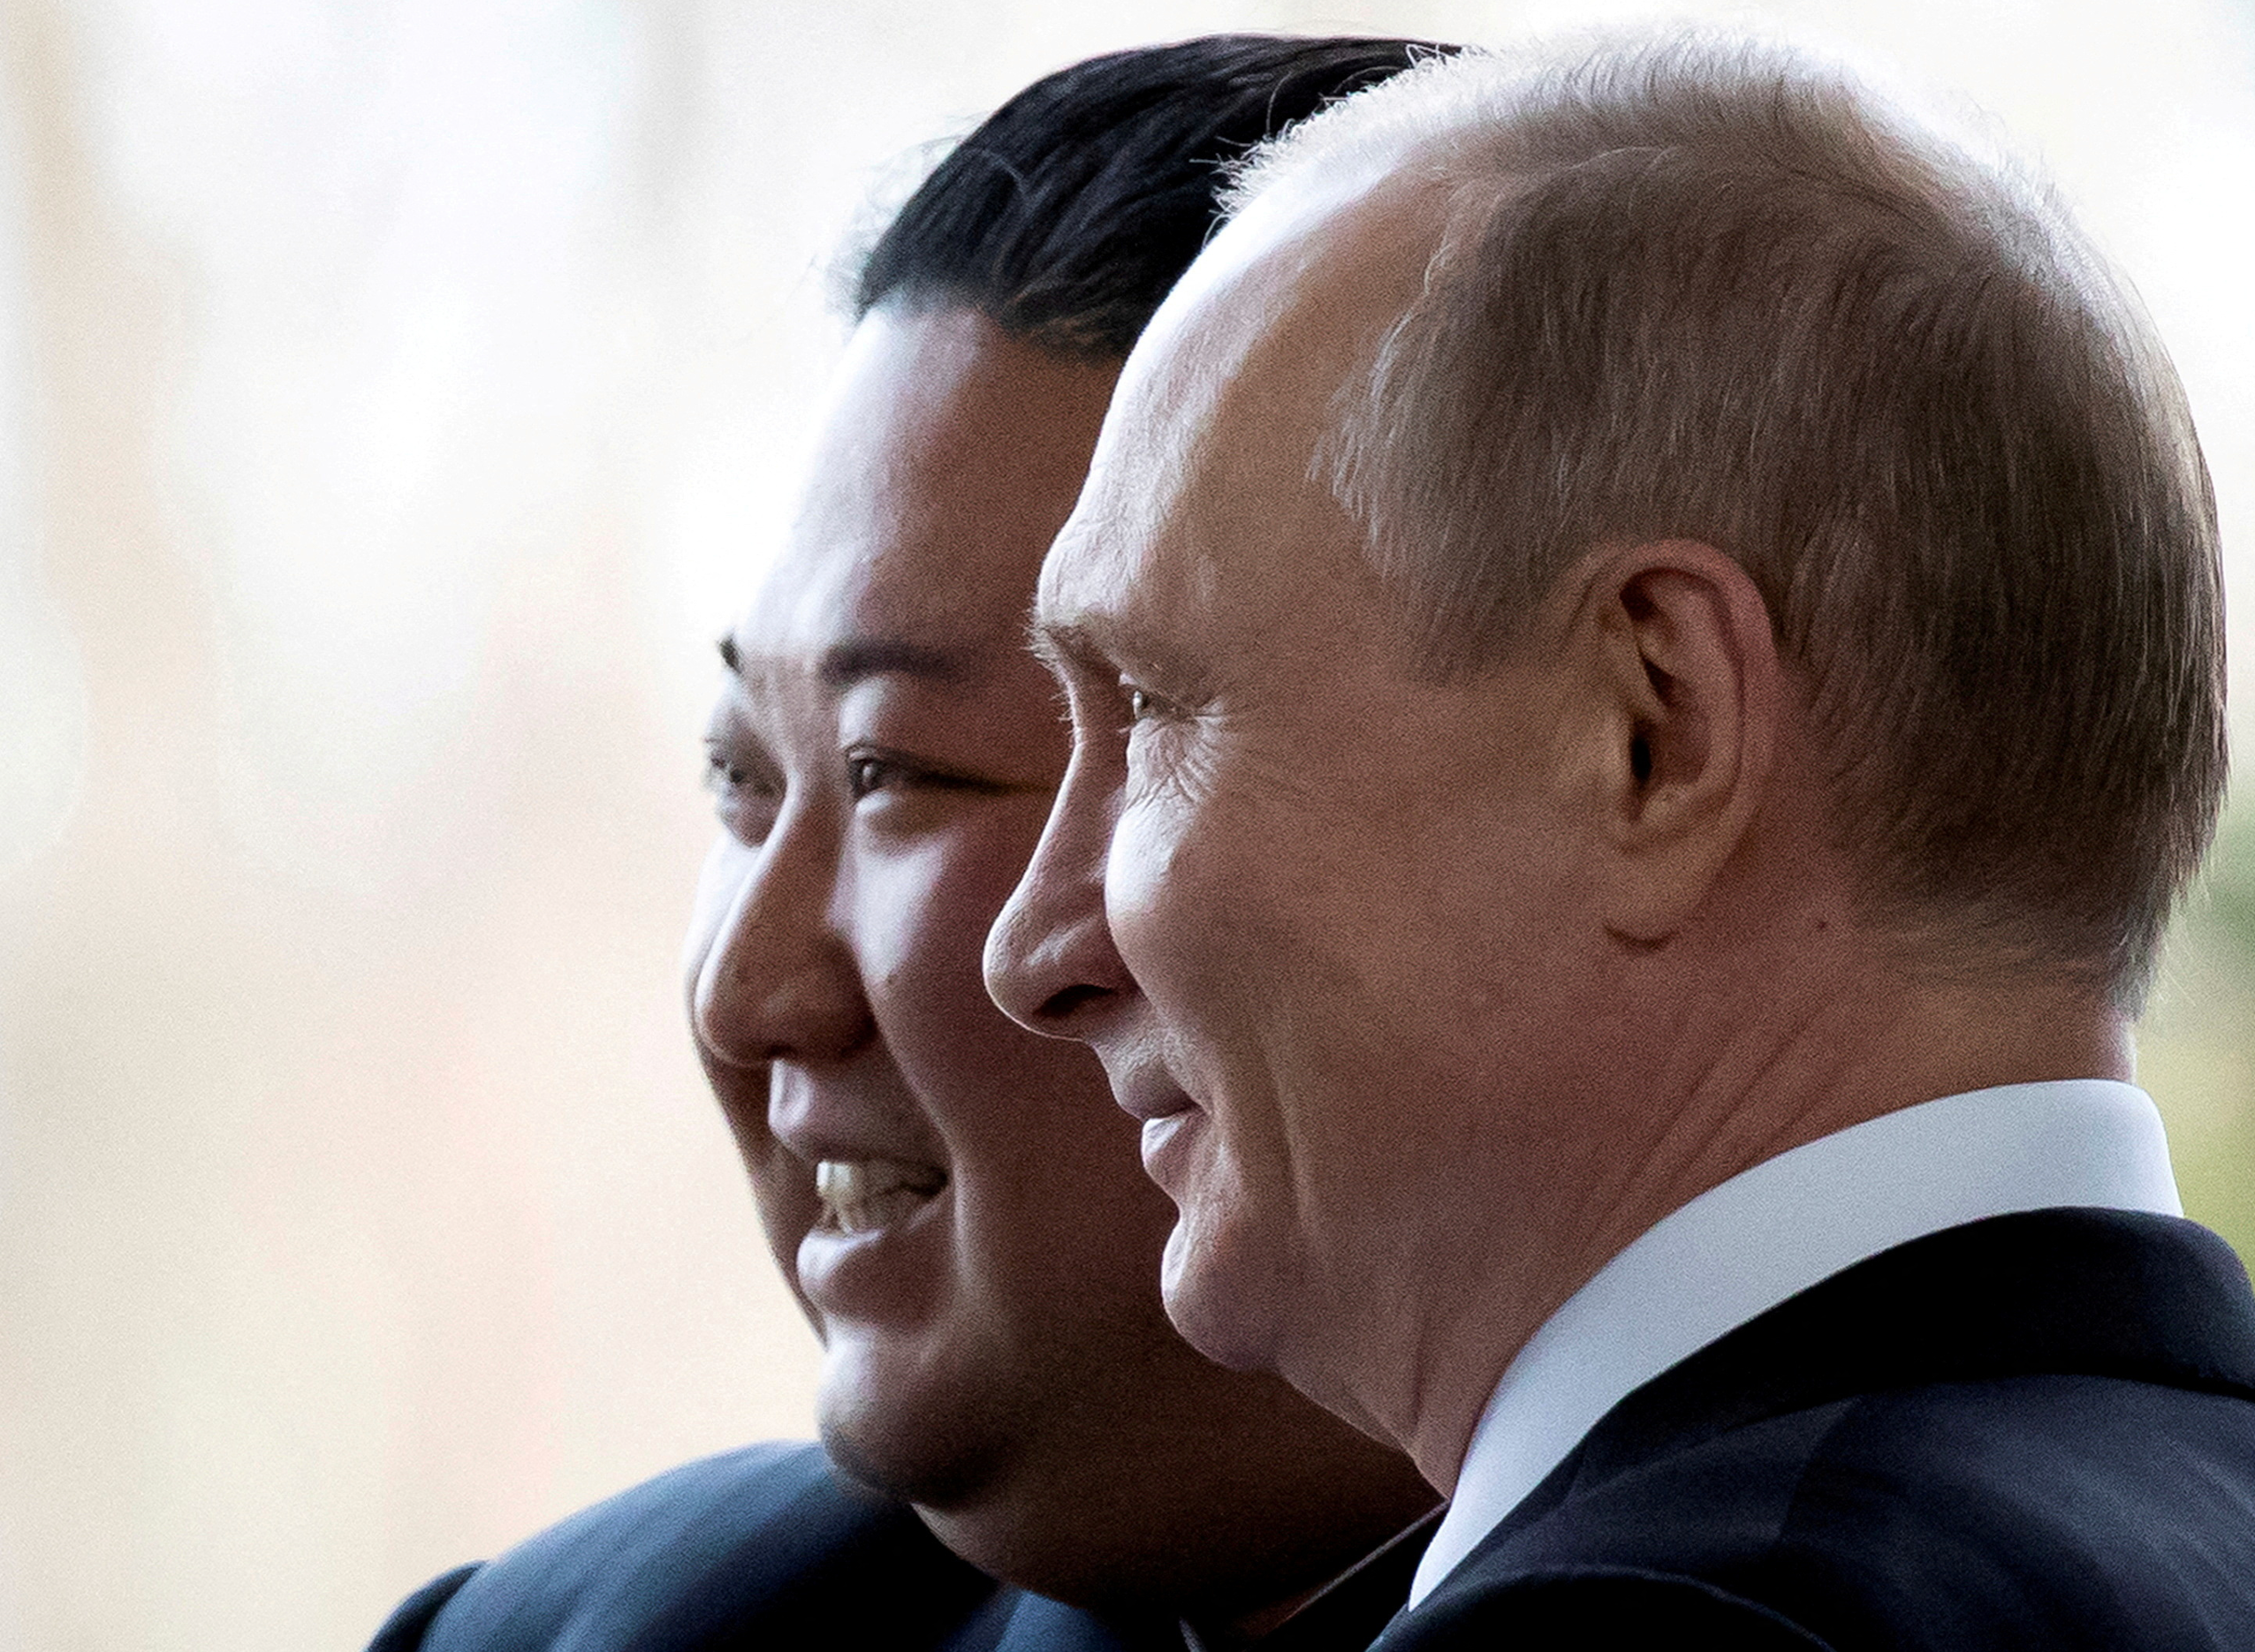 NKorea's Kim to meet Russia’s Putin to discuss arms sales, NYT reports